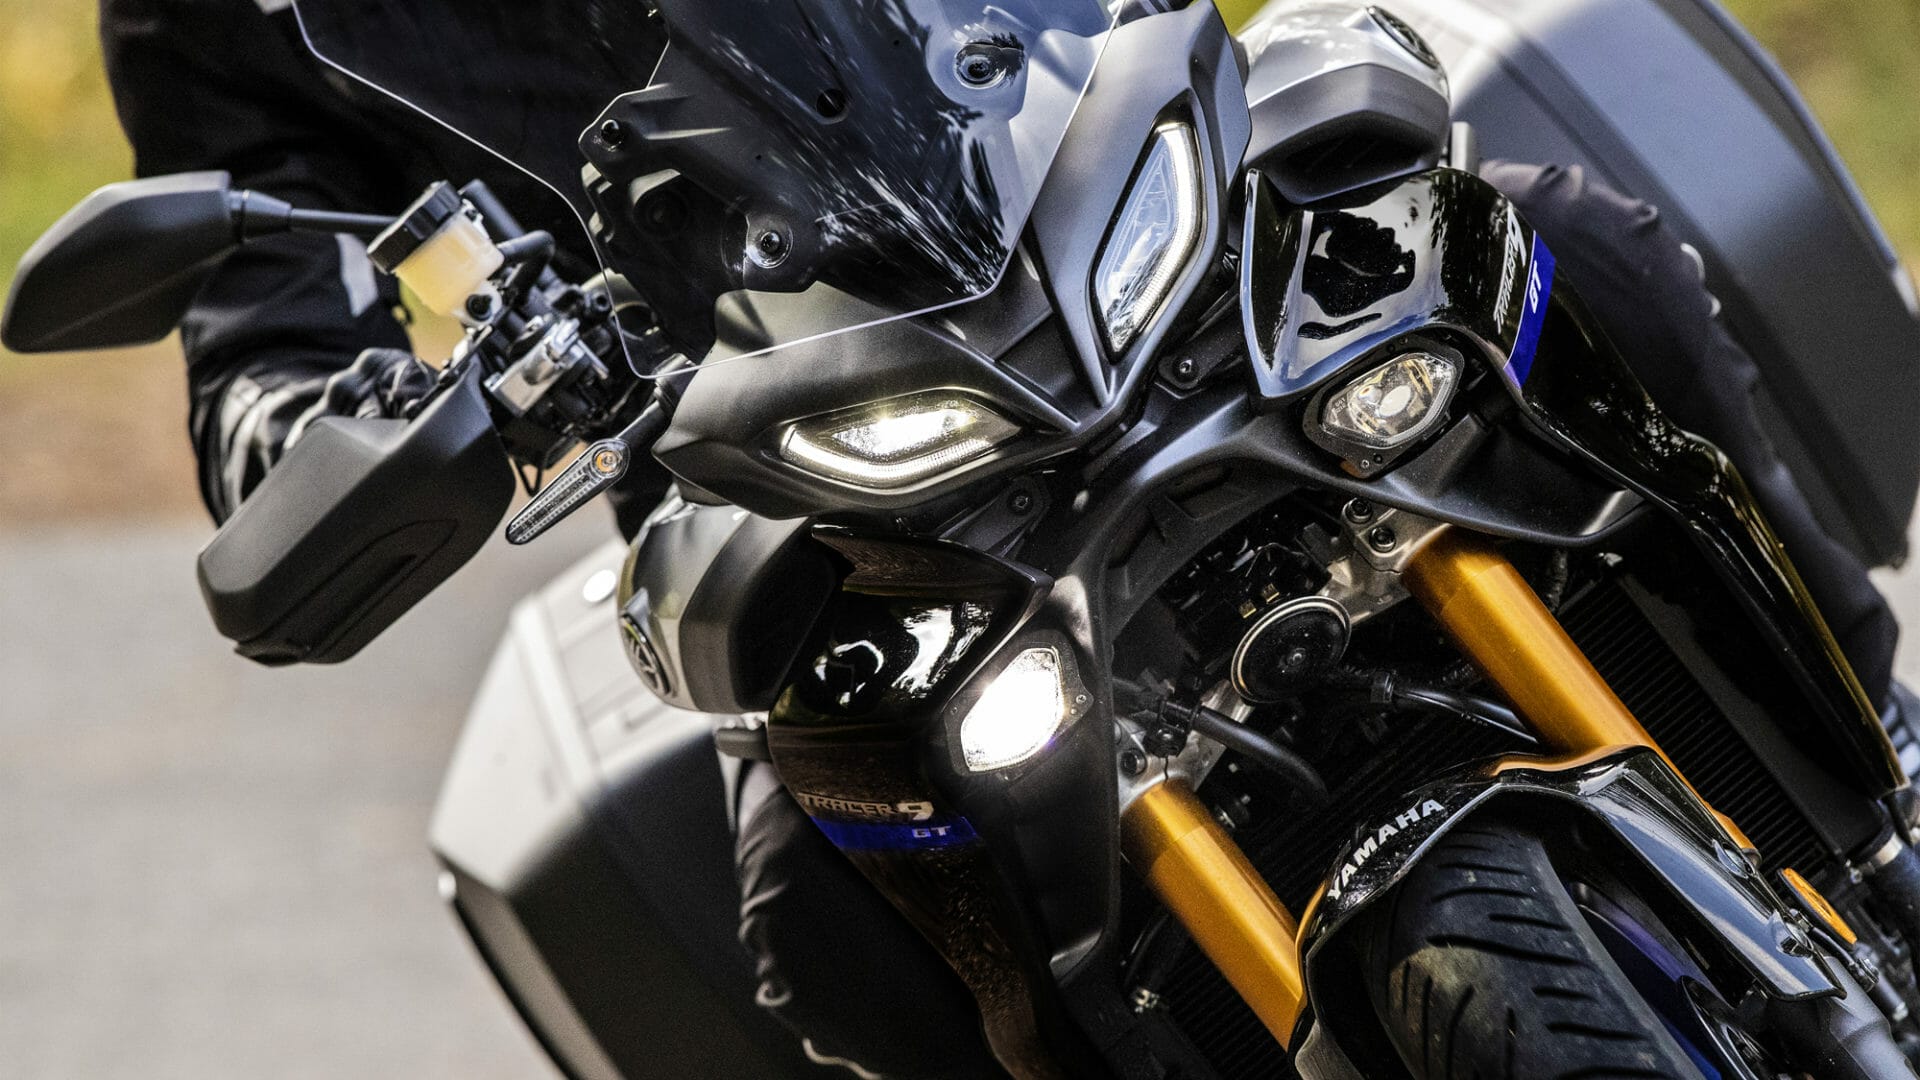 Recall: Yamaha Tracer 9 GT
- also in the MOTORCYCLES.NEWS APP